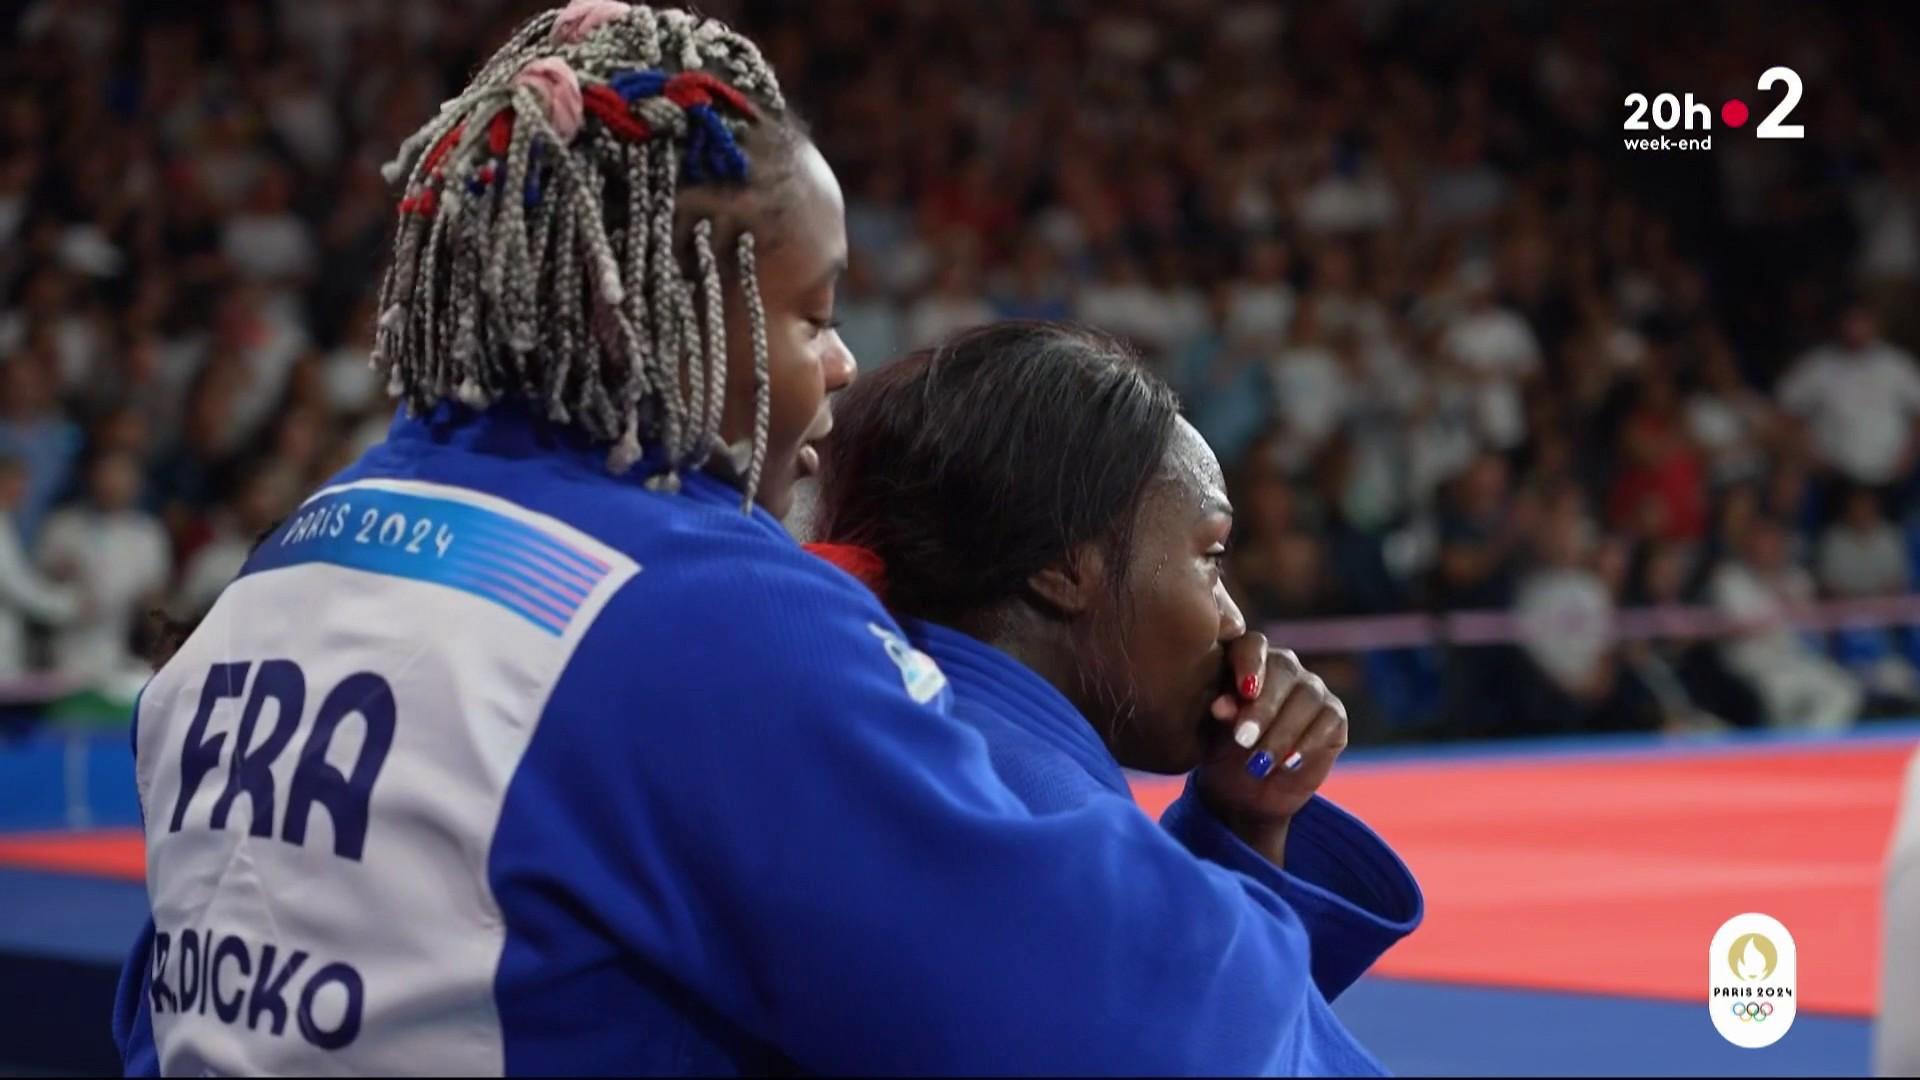 Paris 2024: Dicko, Riner, Agbegnenou... France wins gold and retains its Olympic team title